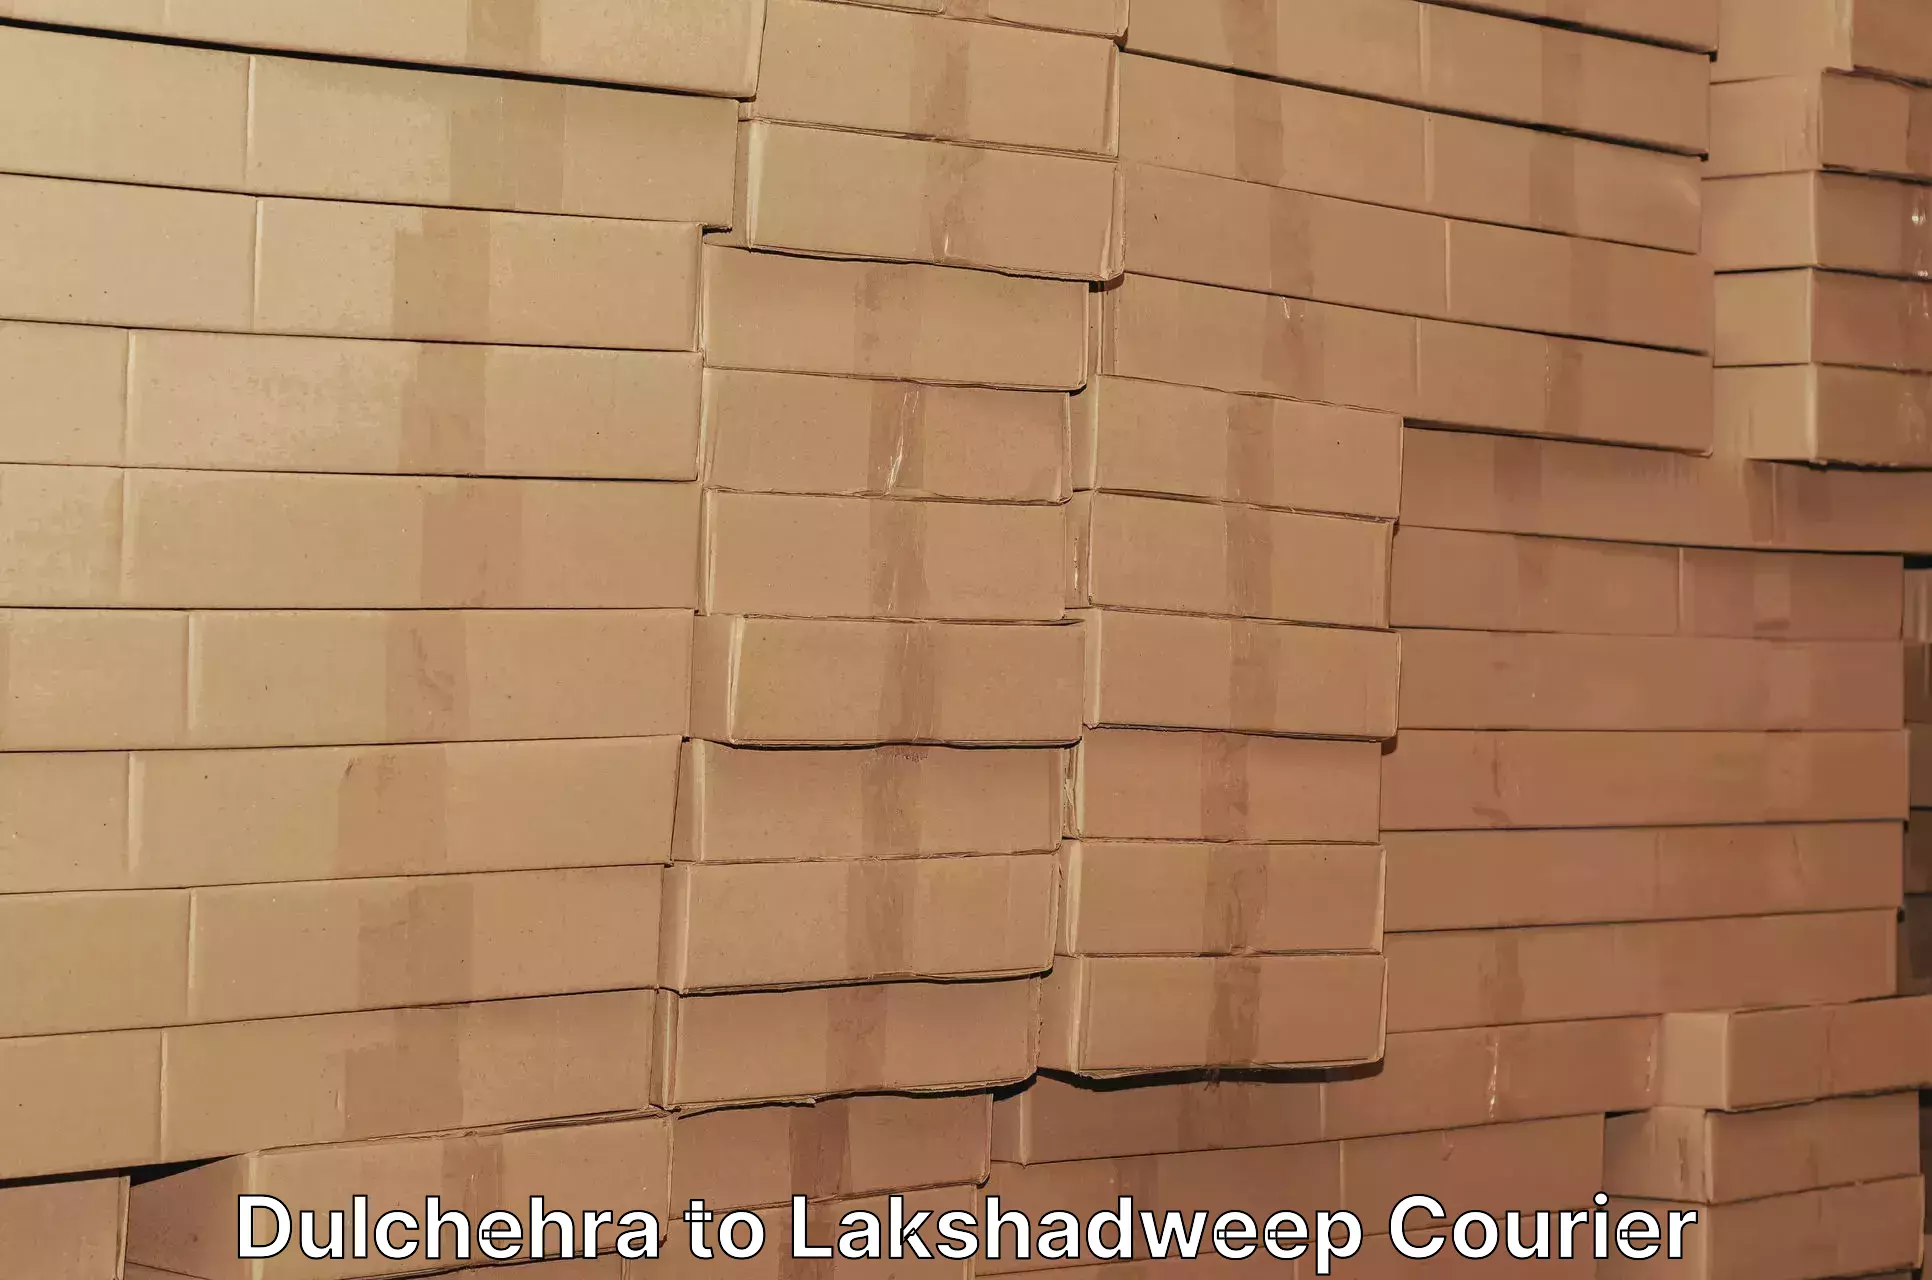 Enhanced delivery experience Dulchehra to Lakshadweep